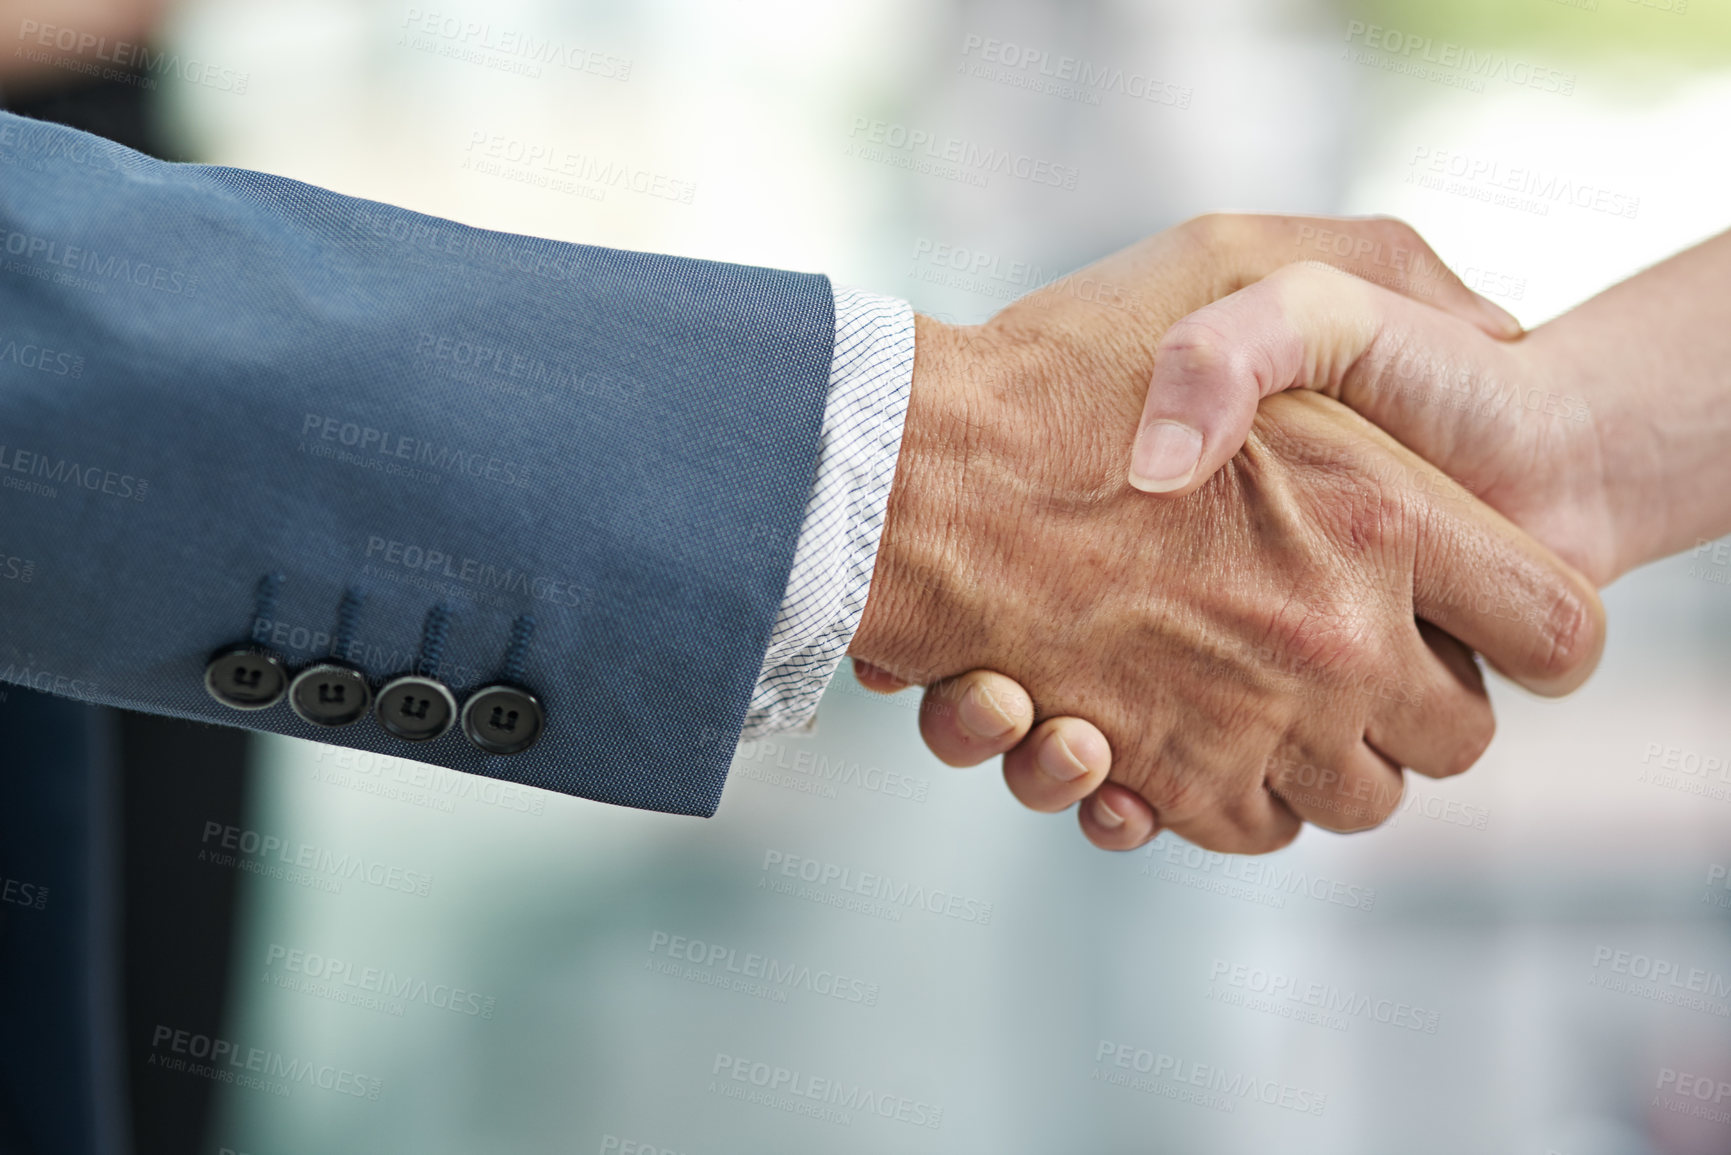 Buy stock photo Closeup shot of businesspeople shaking hands in a modern office